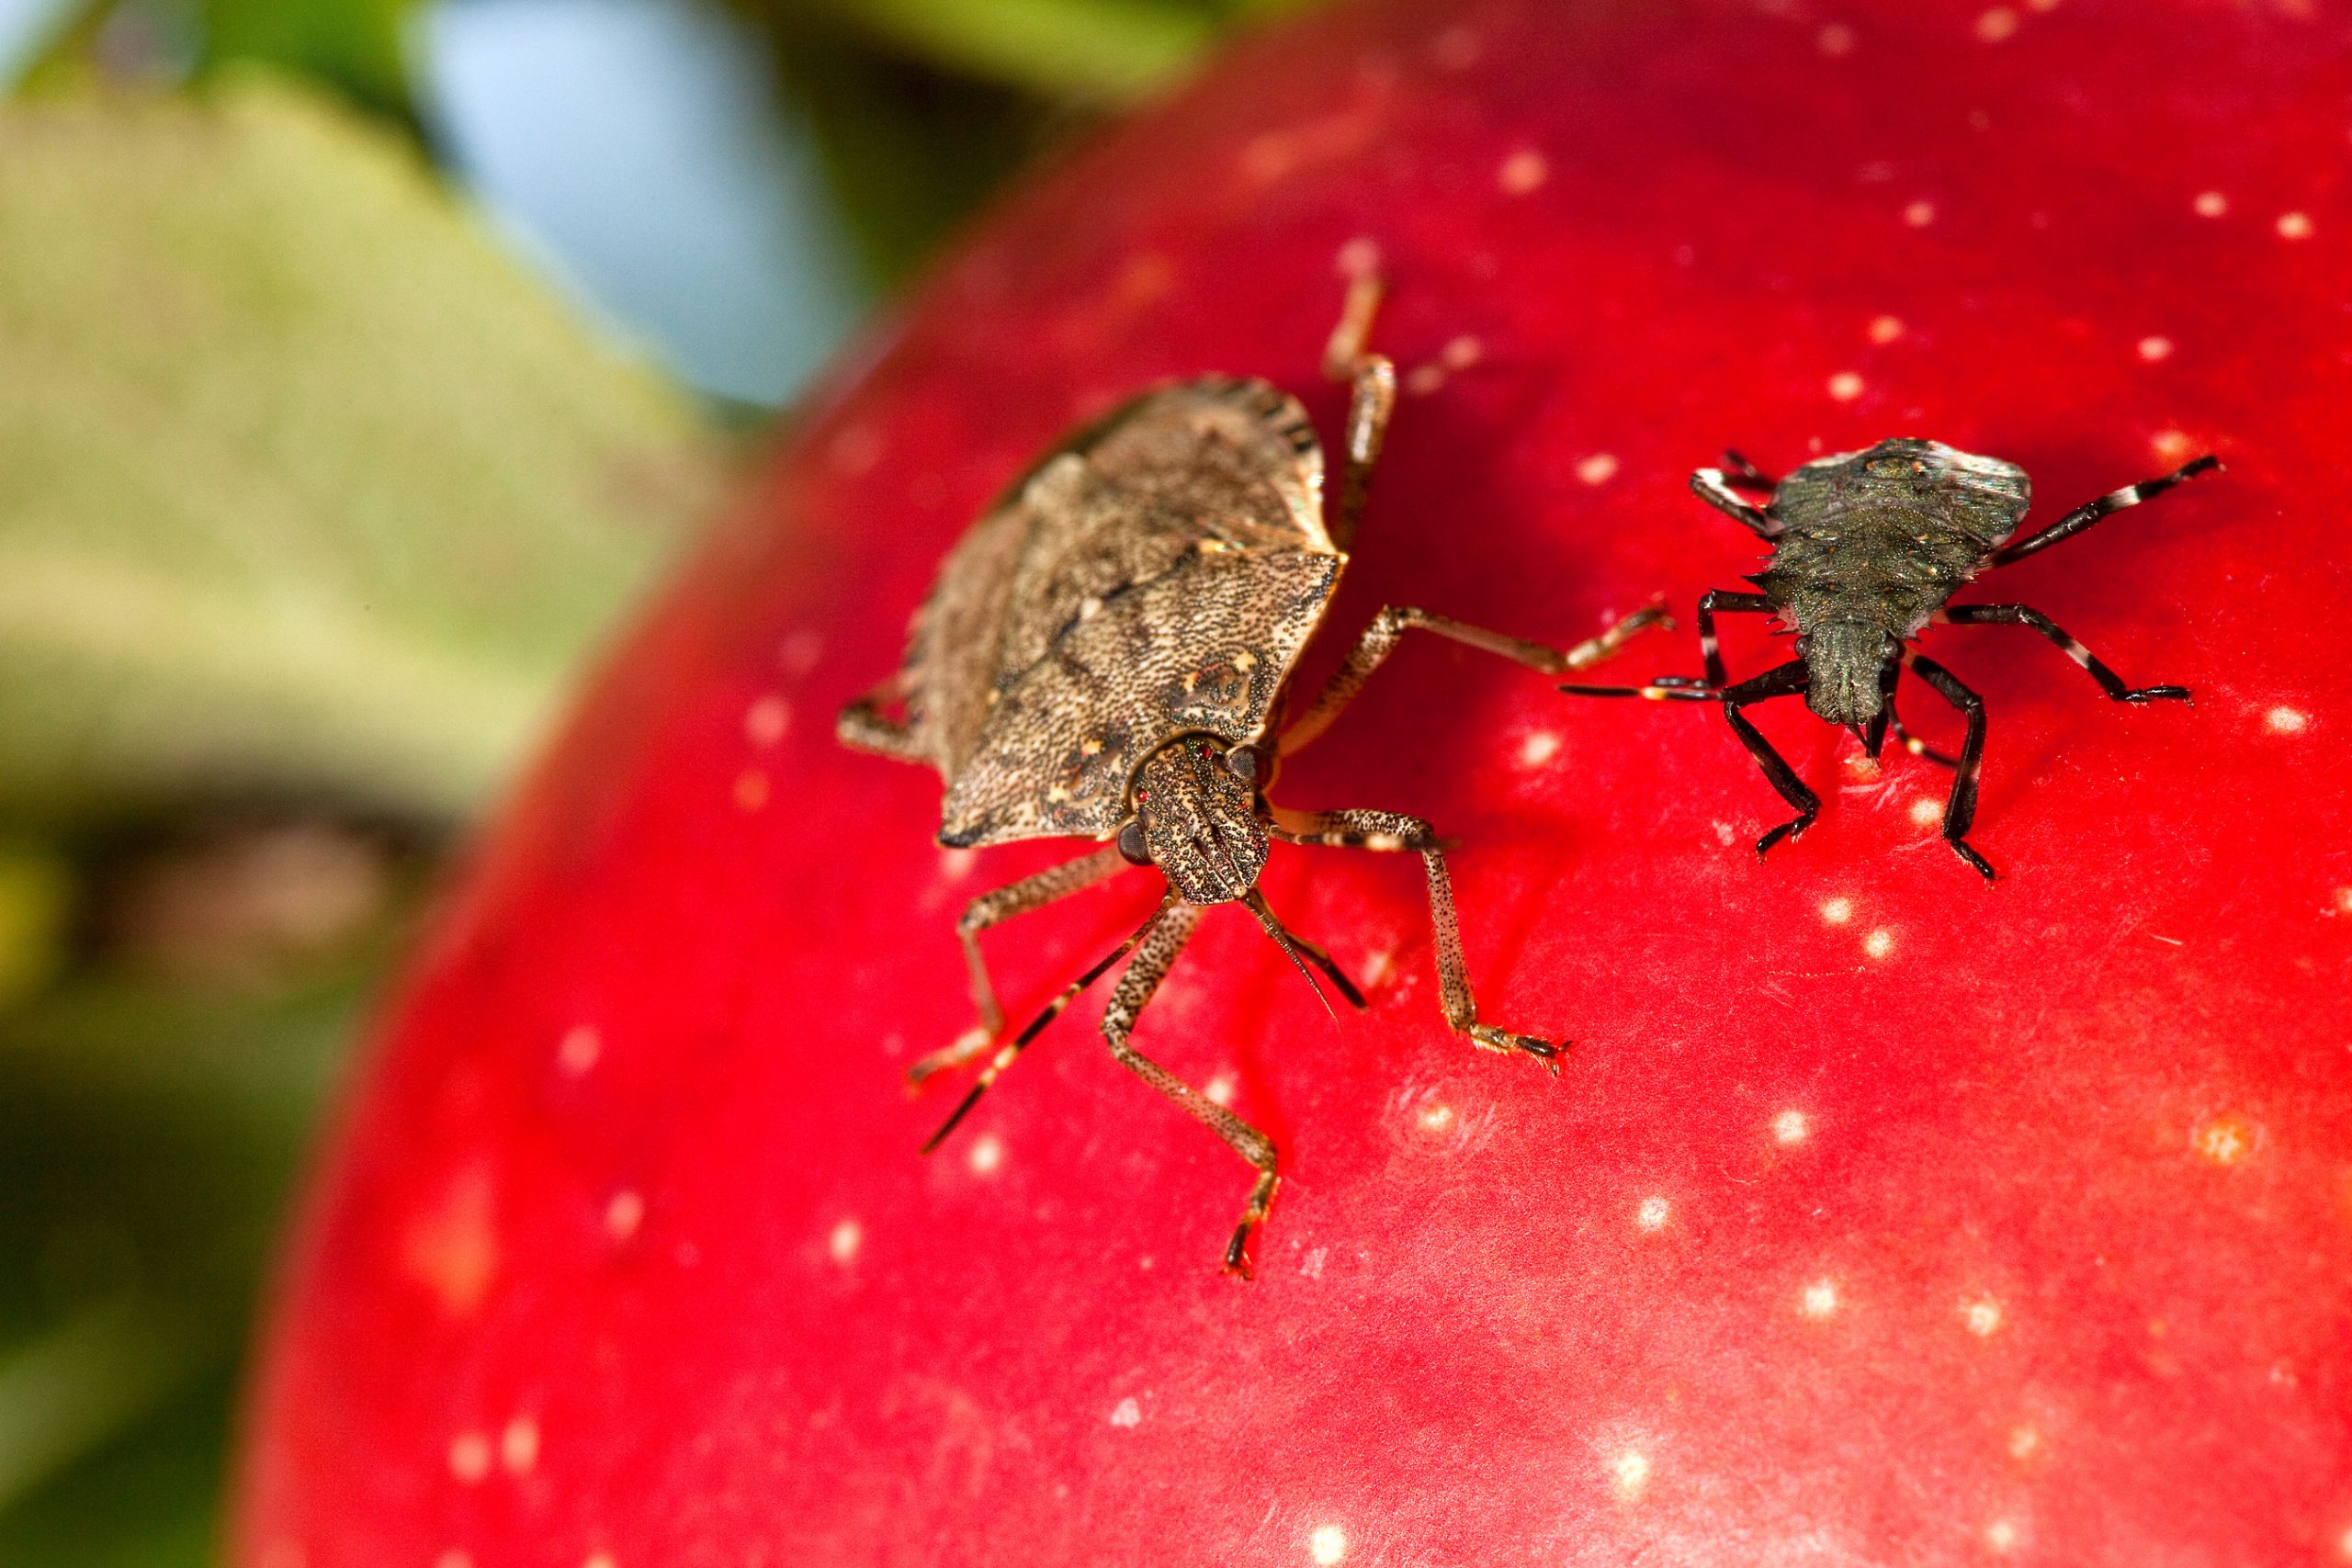 Farmers in northern Italy are said to be worried about the proliferation of the brown marmorated stink bug (Halyomorpha halys) in Veneto and Friuli-Venezia Giuliam. The crops most at risk are apples, pears, kiwi fruit, grapes, soya beans and maize, according to Italian MEP Mara Bizzotto.